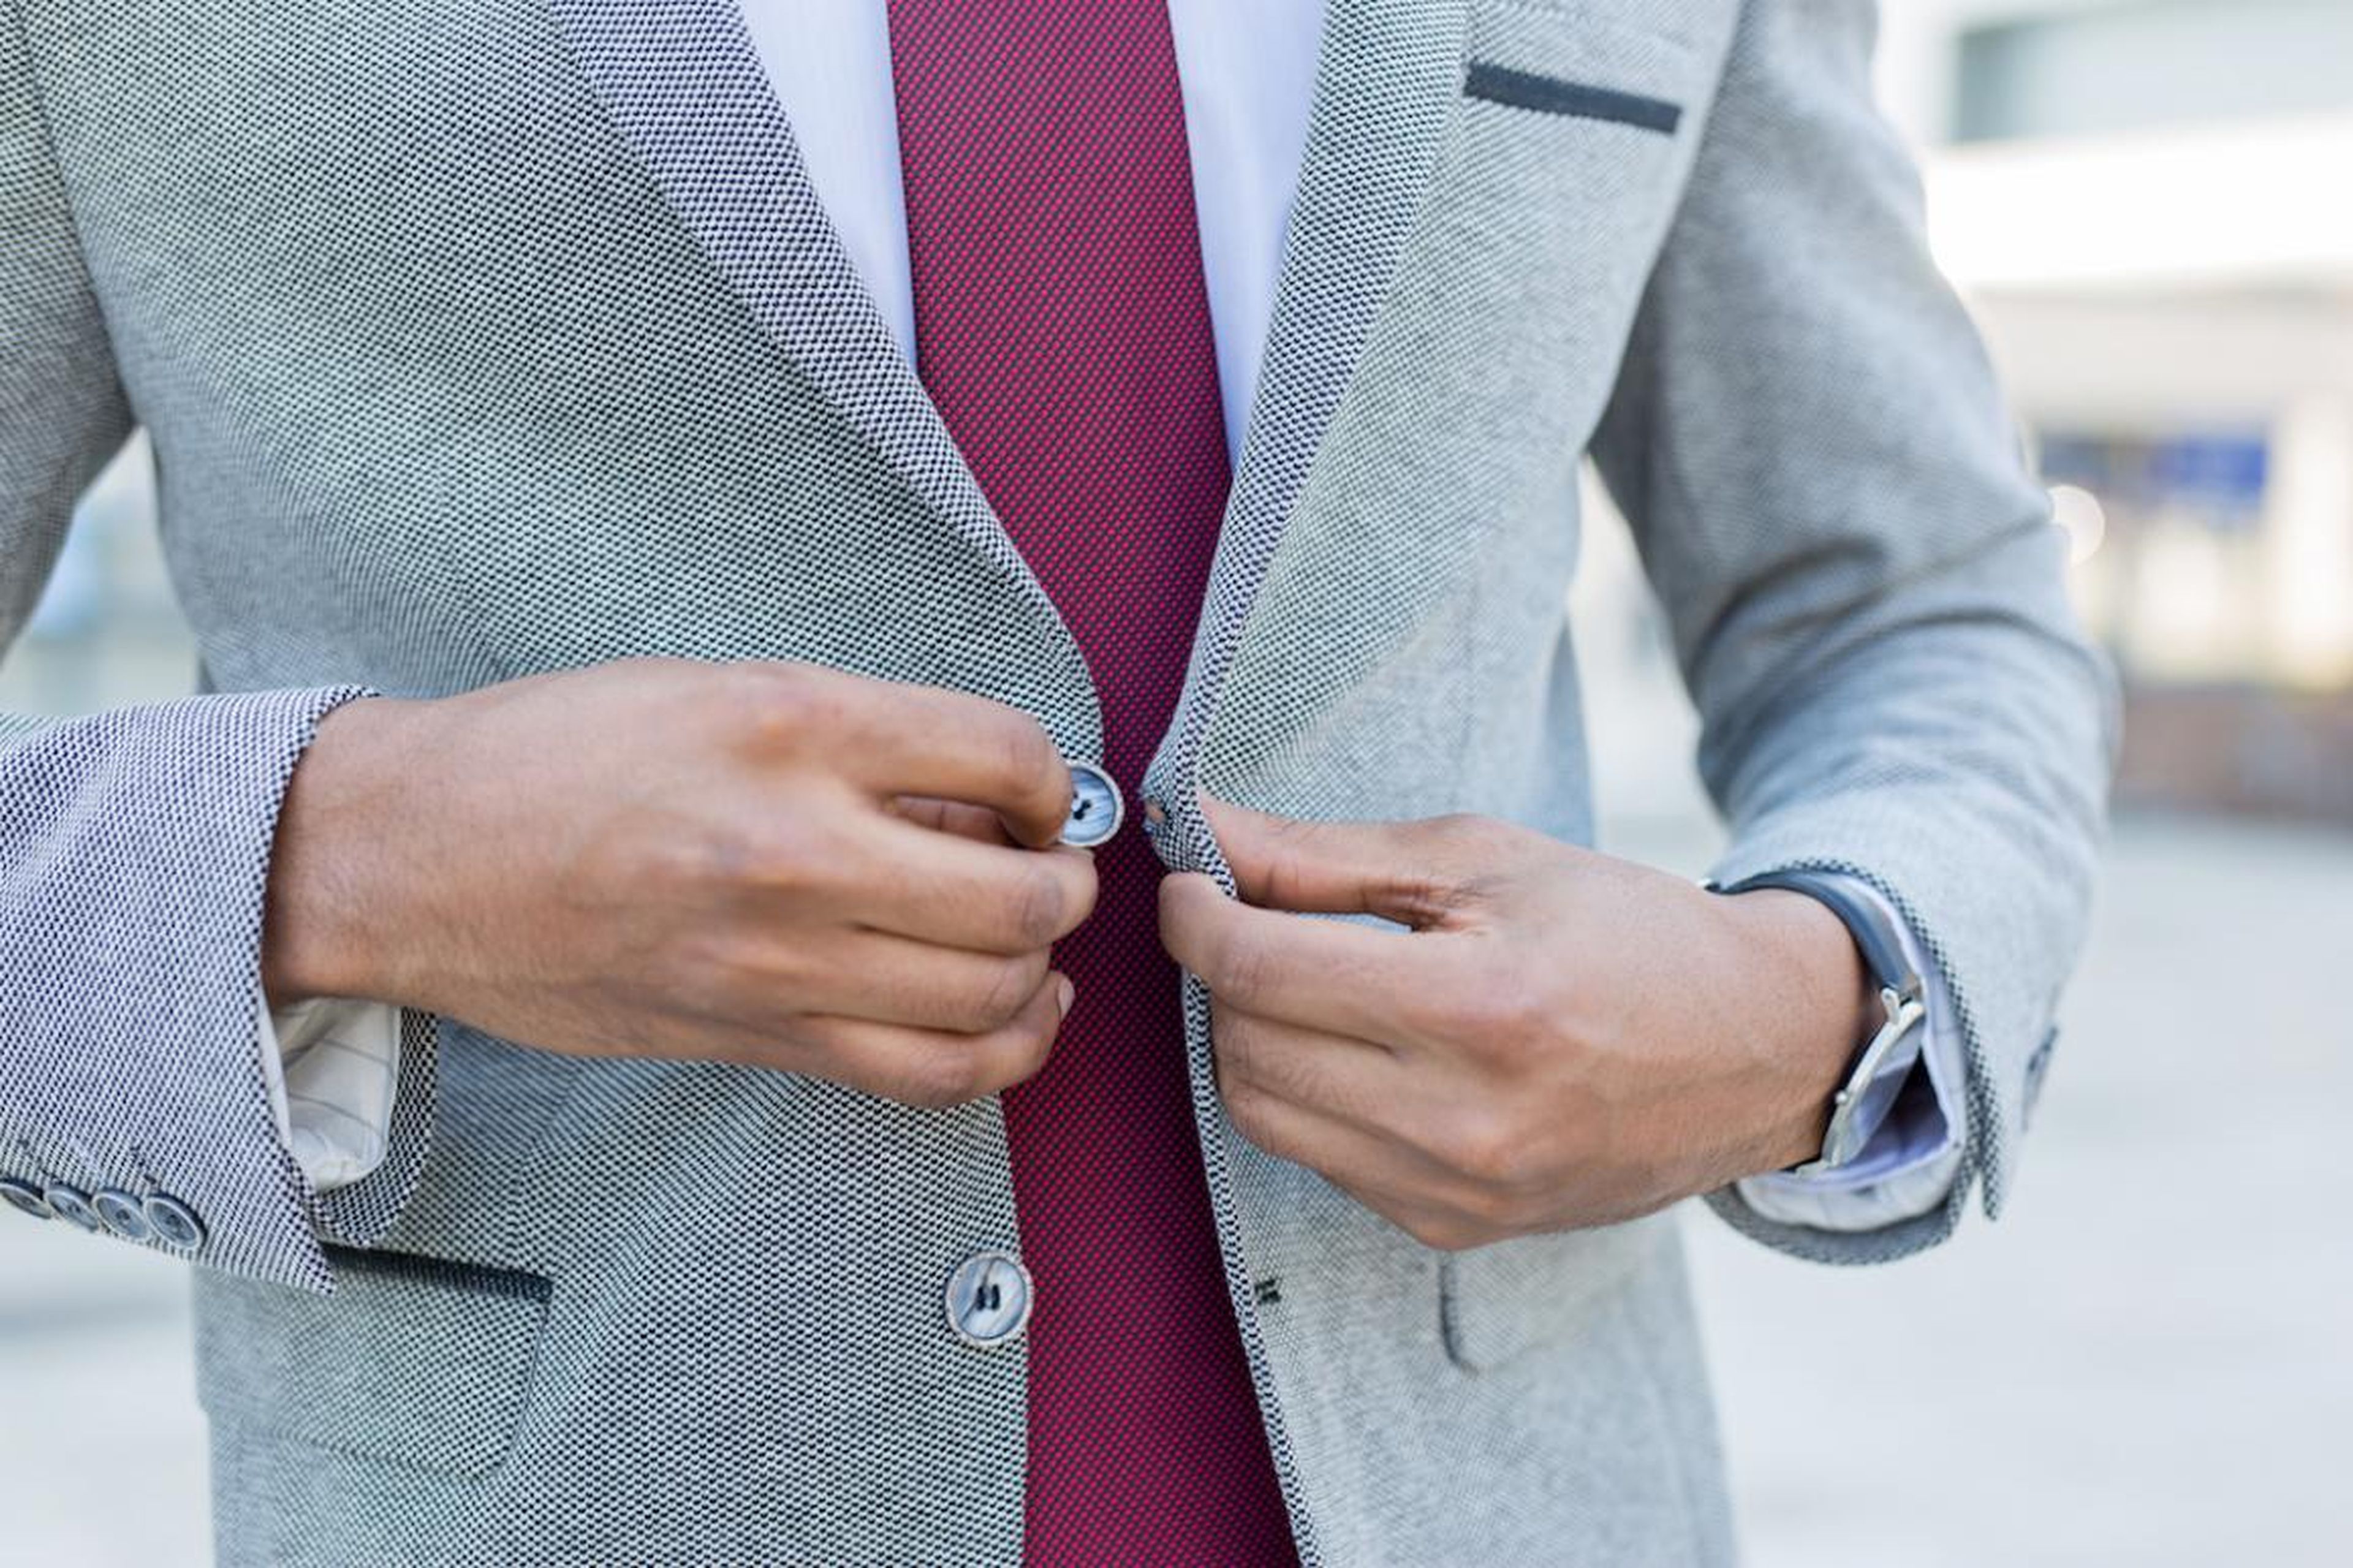 Crisp, well-fitted clothes can help you feel more confident on your first day.